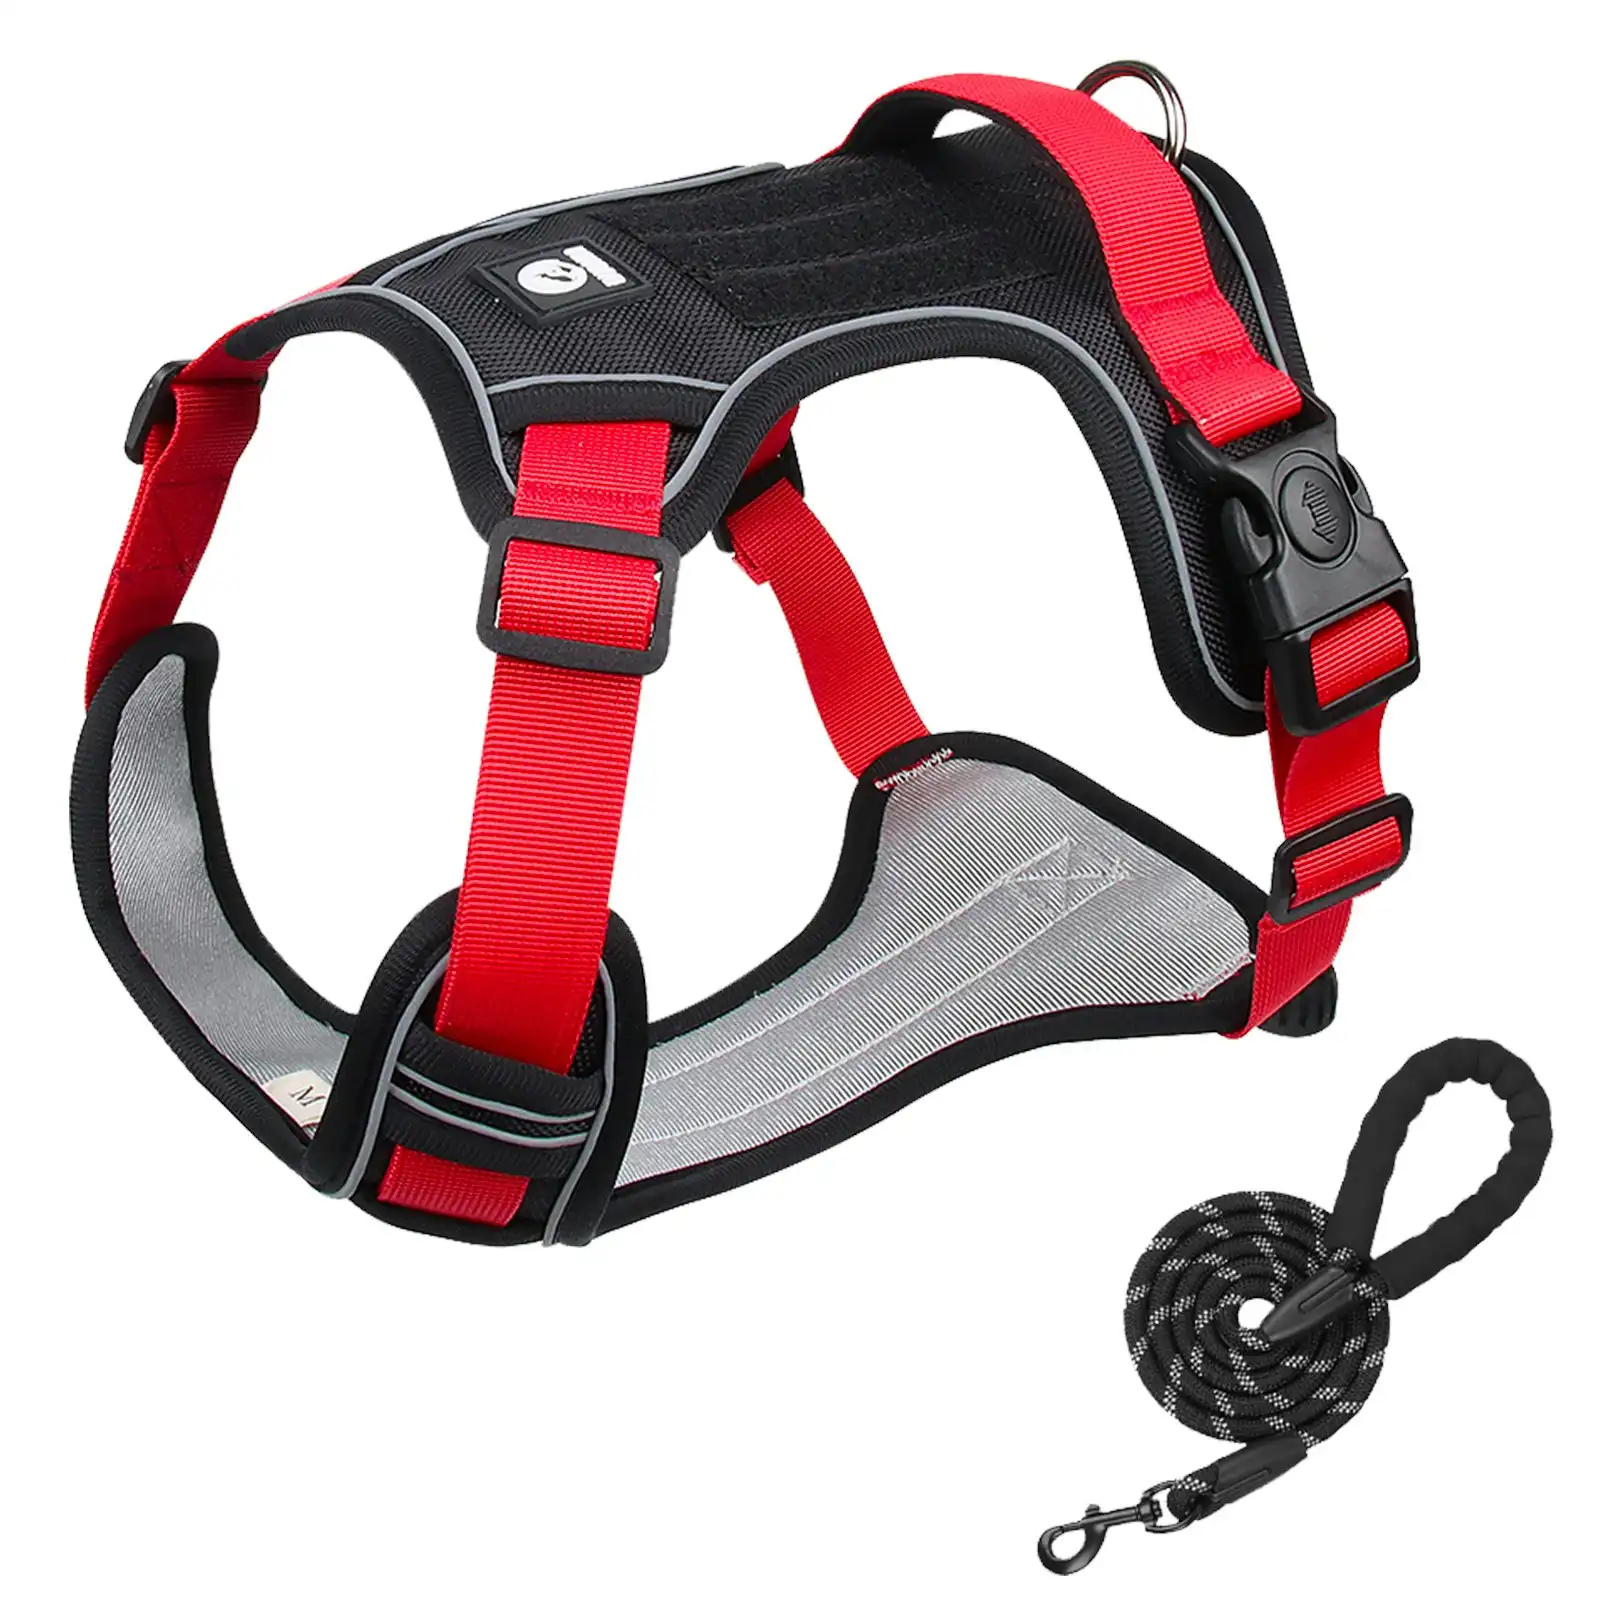 Furbulous Tactical Dog Harness Adjustable No Pull Pet Harness Reflective Working Training Dog Harness with 1.5m Lead - Red Large